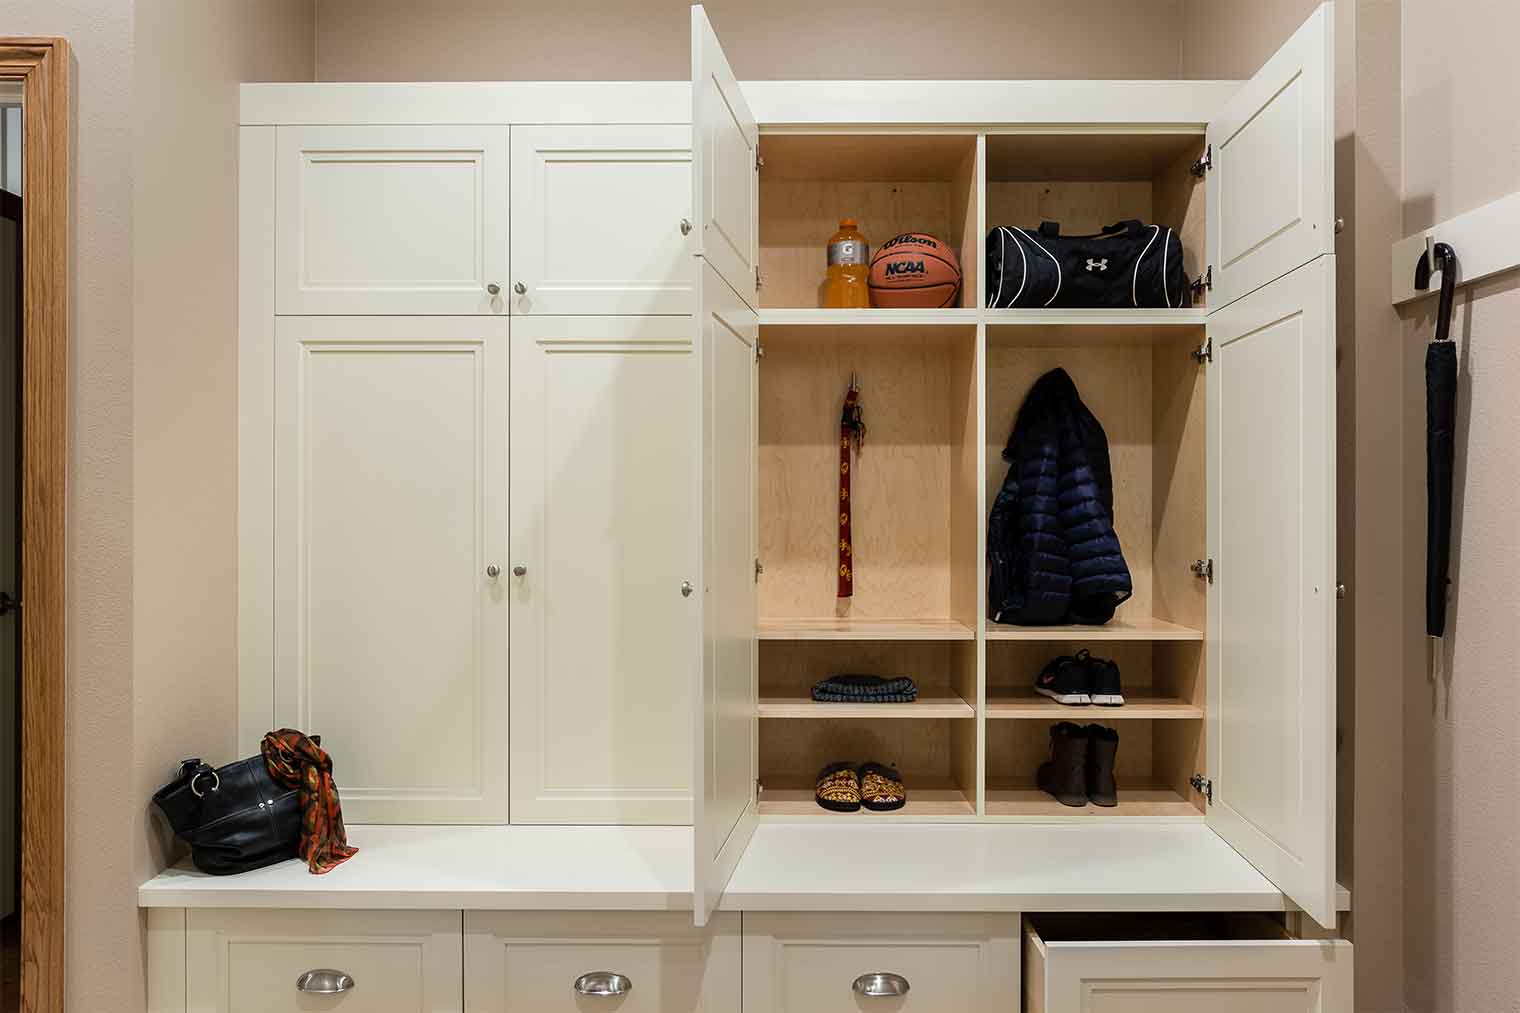 Mudroom remodel by Silent Rivers in this large Clive, Iowa features custom cabinets to organize this family of six